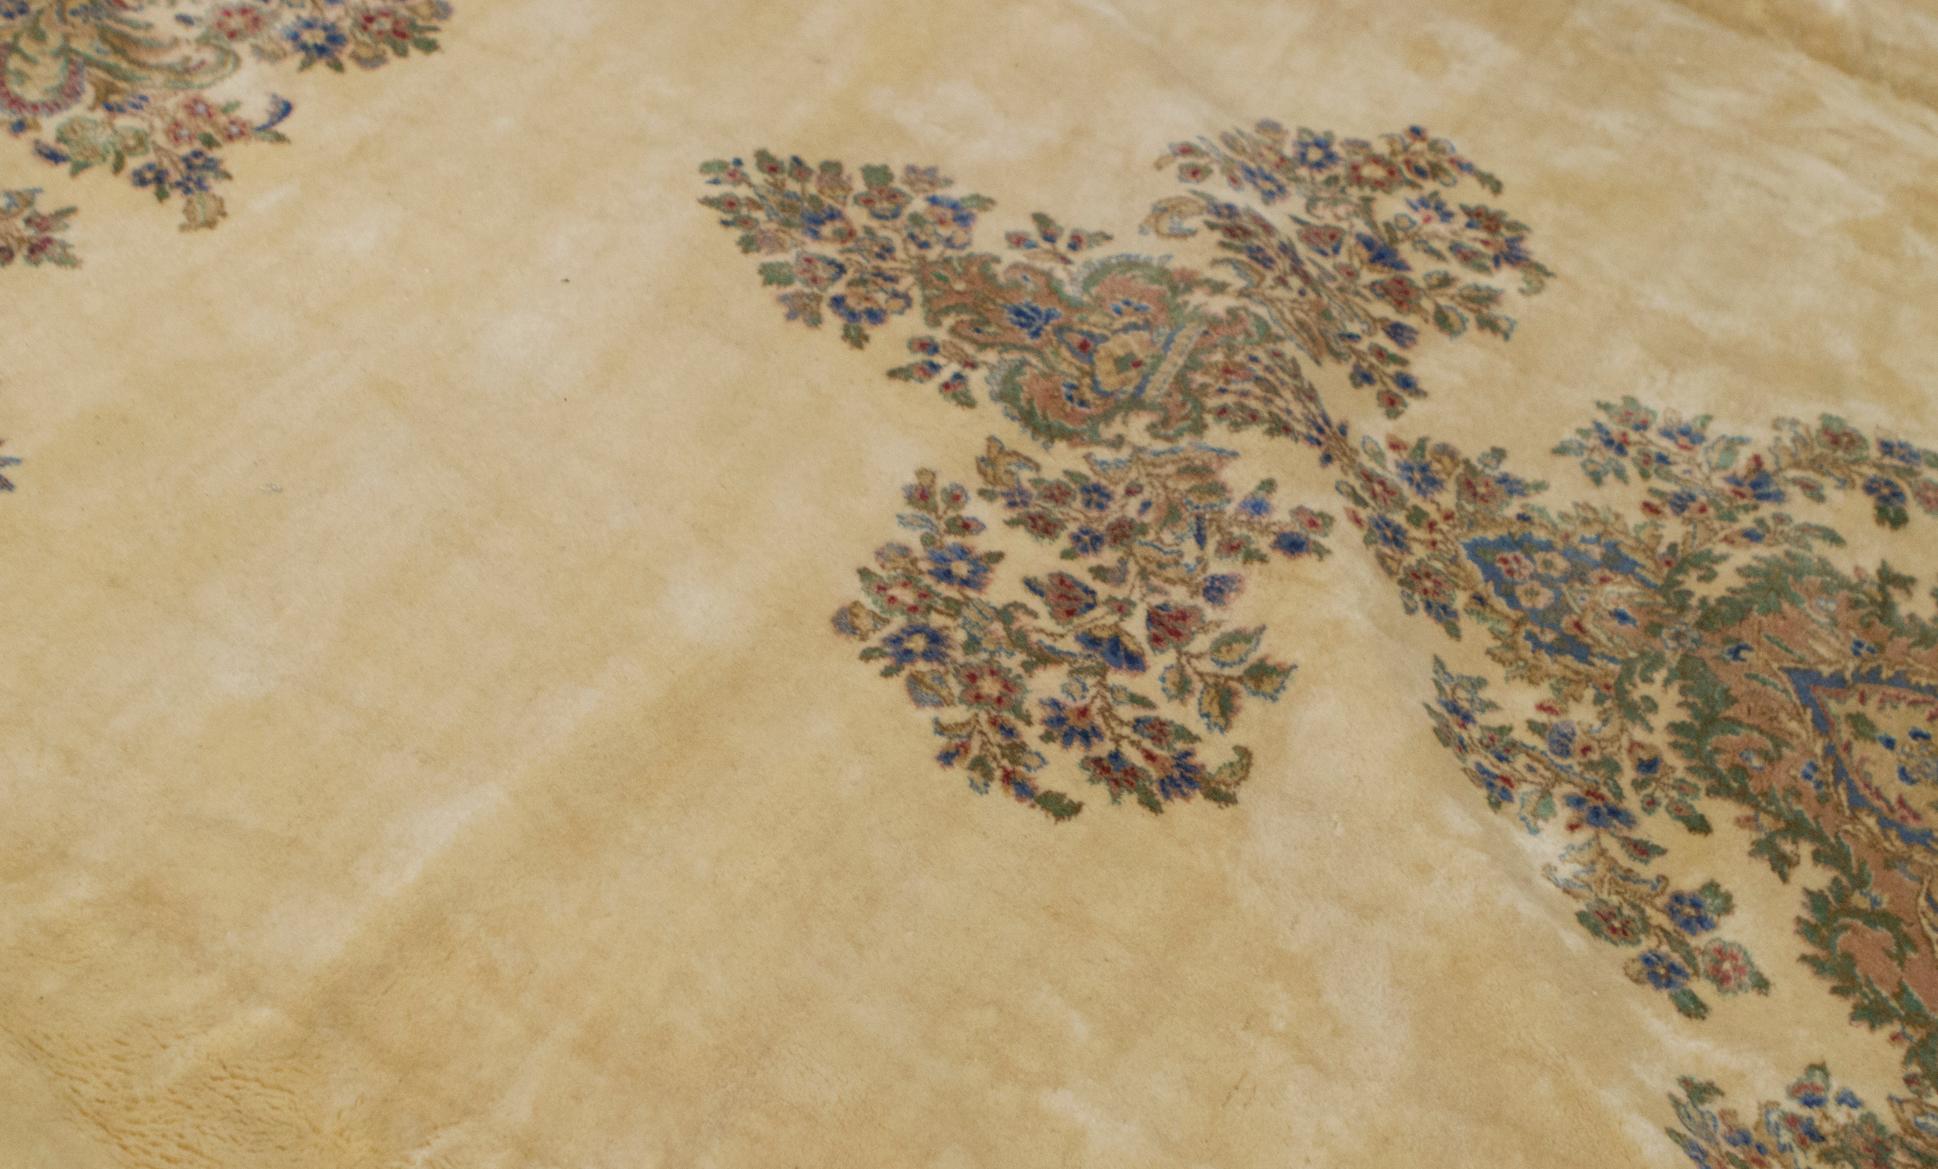 A delightful Kerman rug woven with exquisite detail, the red ground filled with weaving floral designs surrounding a central ivory and soft blue medallion bounded by a soft green main border and ivory and blue guard borders to give this rug a